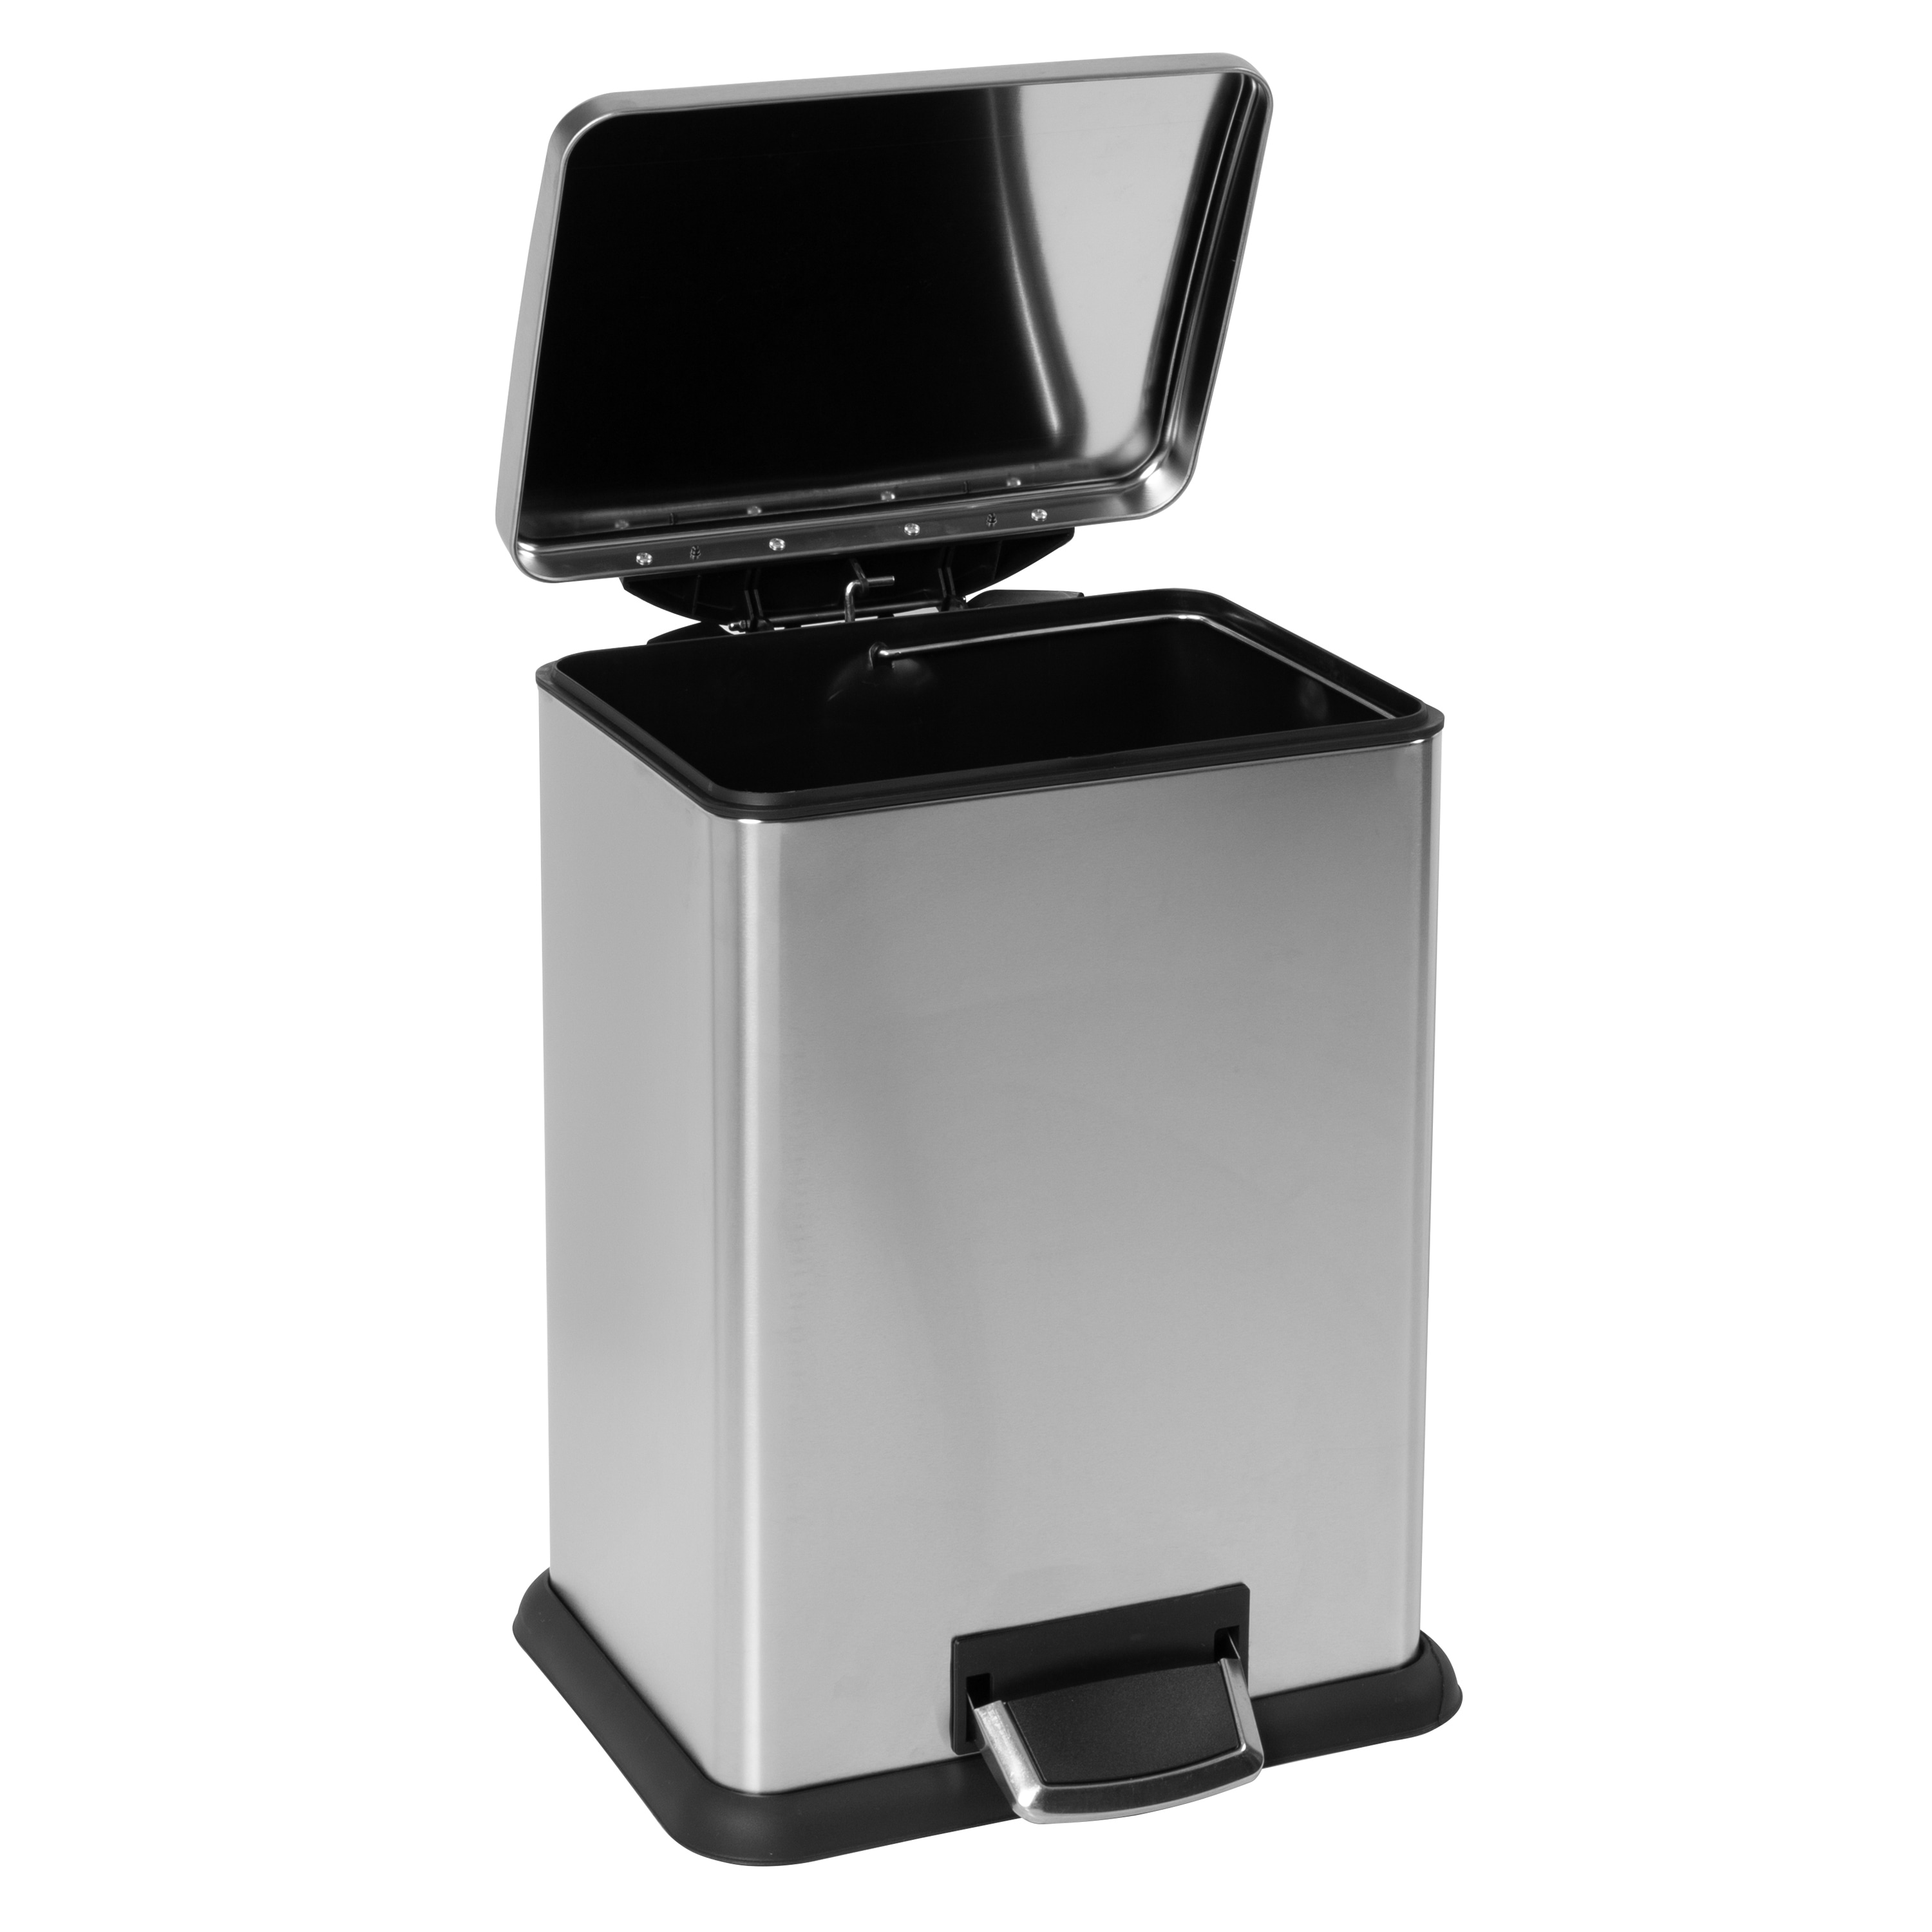 https://ak1.ostkcdn.com/images/products/is/images/direct/f9d246679d277ac4978b455ece7b7467415bcbcb/Tall-and-Wide-58-Liter-Stainless-Steel-Step-Trash-Can-with-Lid.jpg